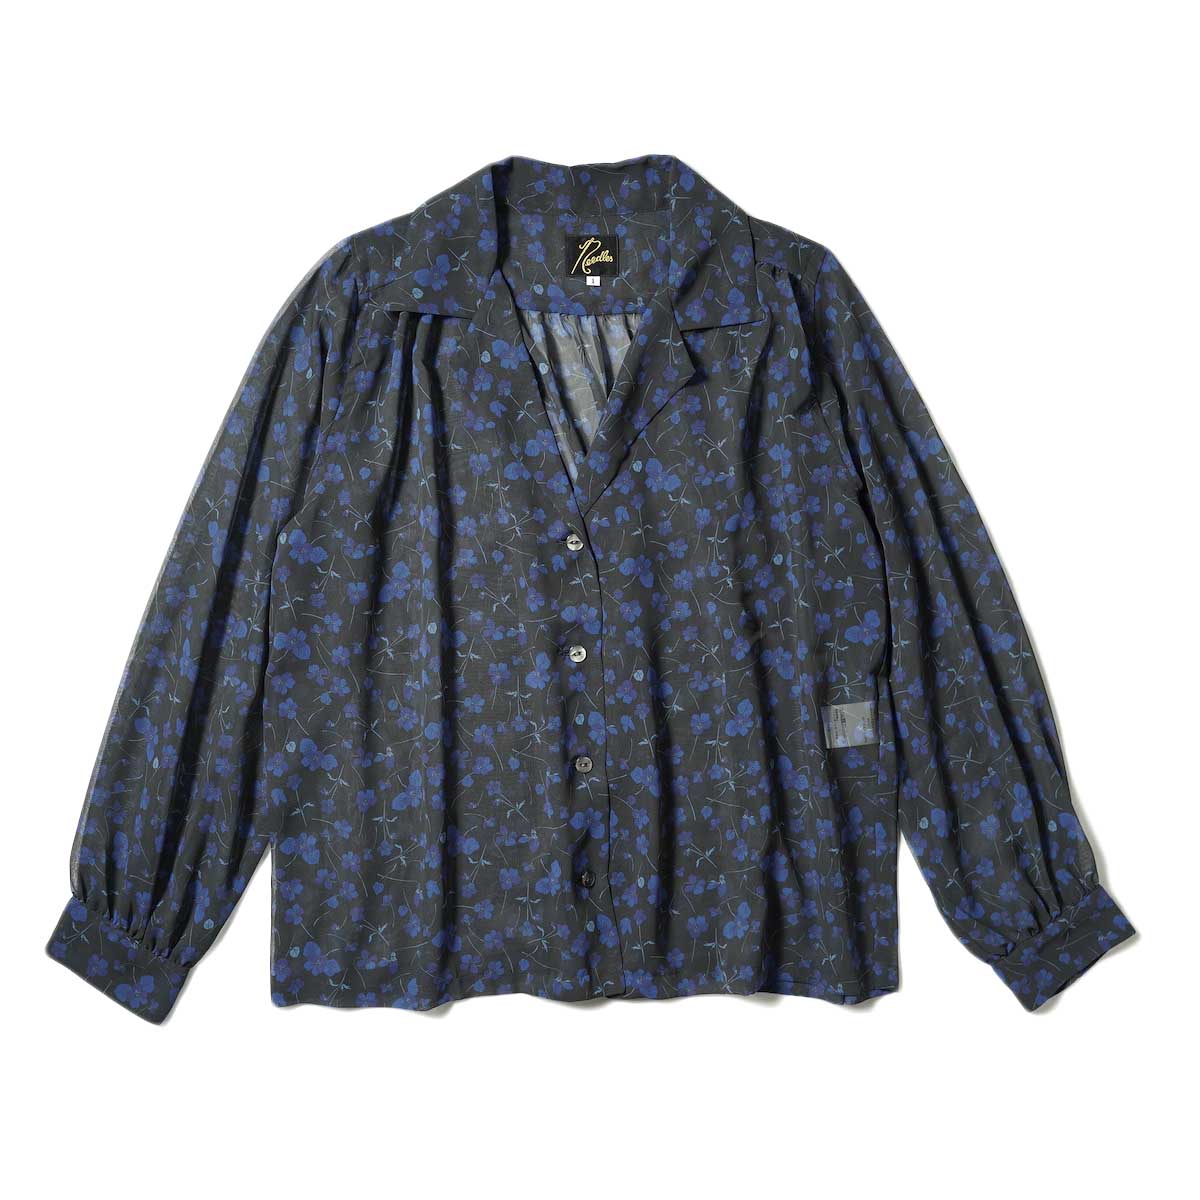 Needles / Gathered Blouse - Poly Chiffon / Floral Printed (Black) 正面